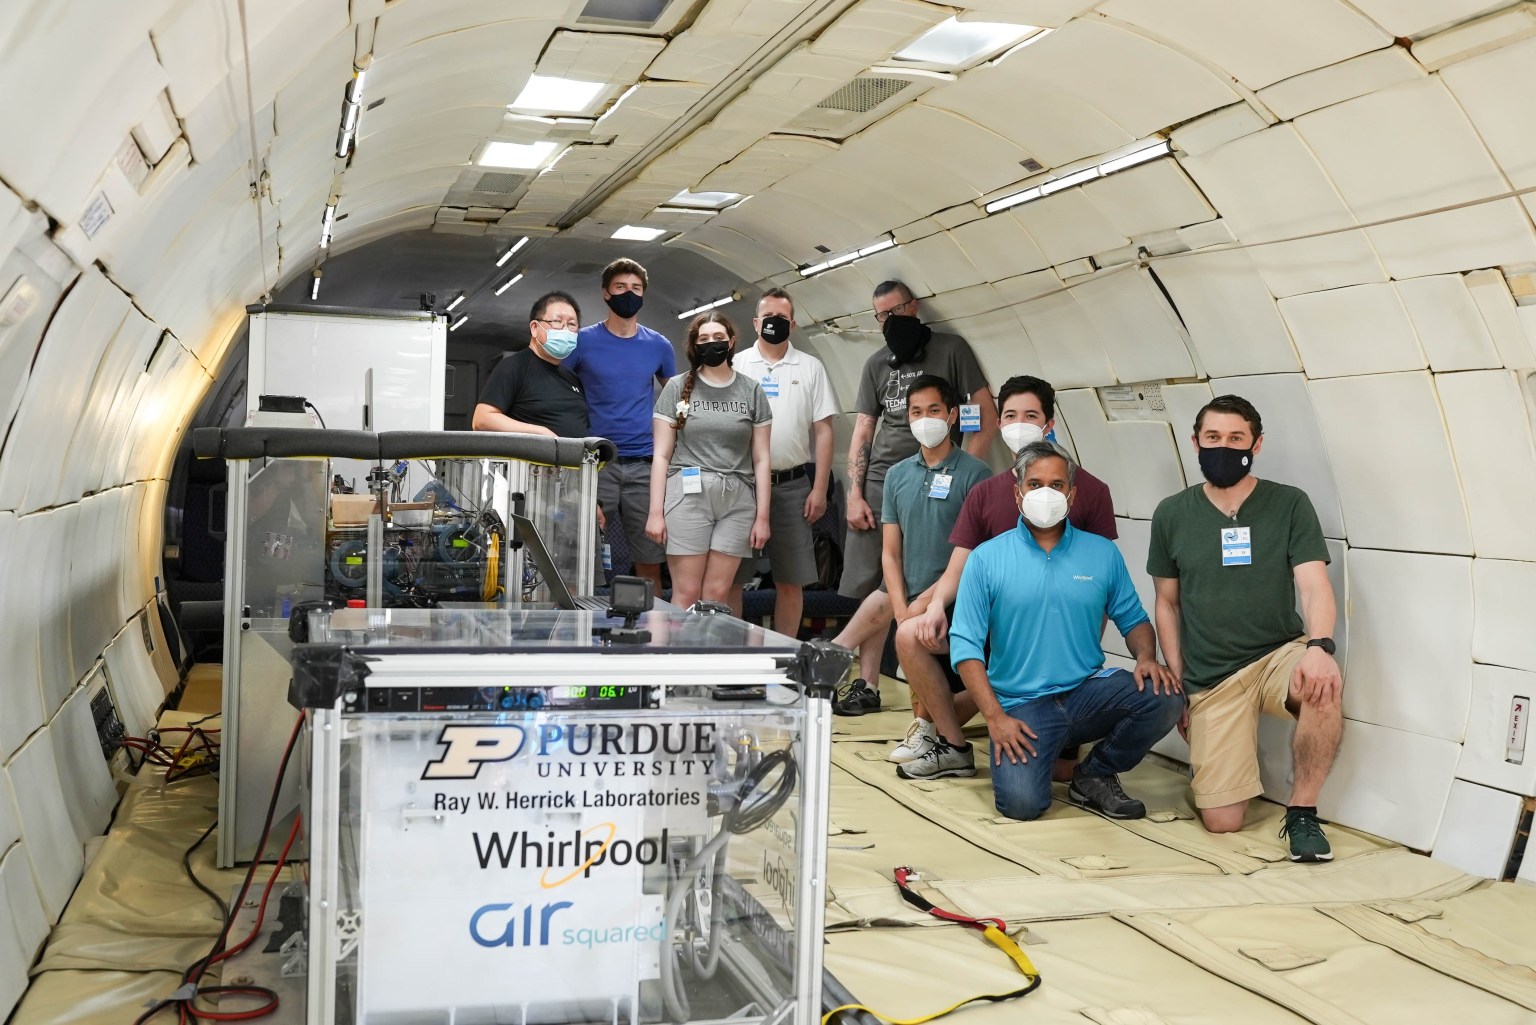 Researchers from Purdue University aboard G-FORCE One